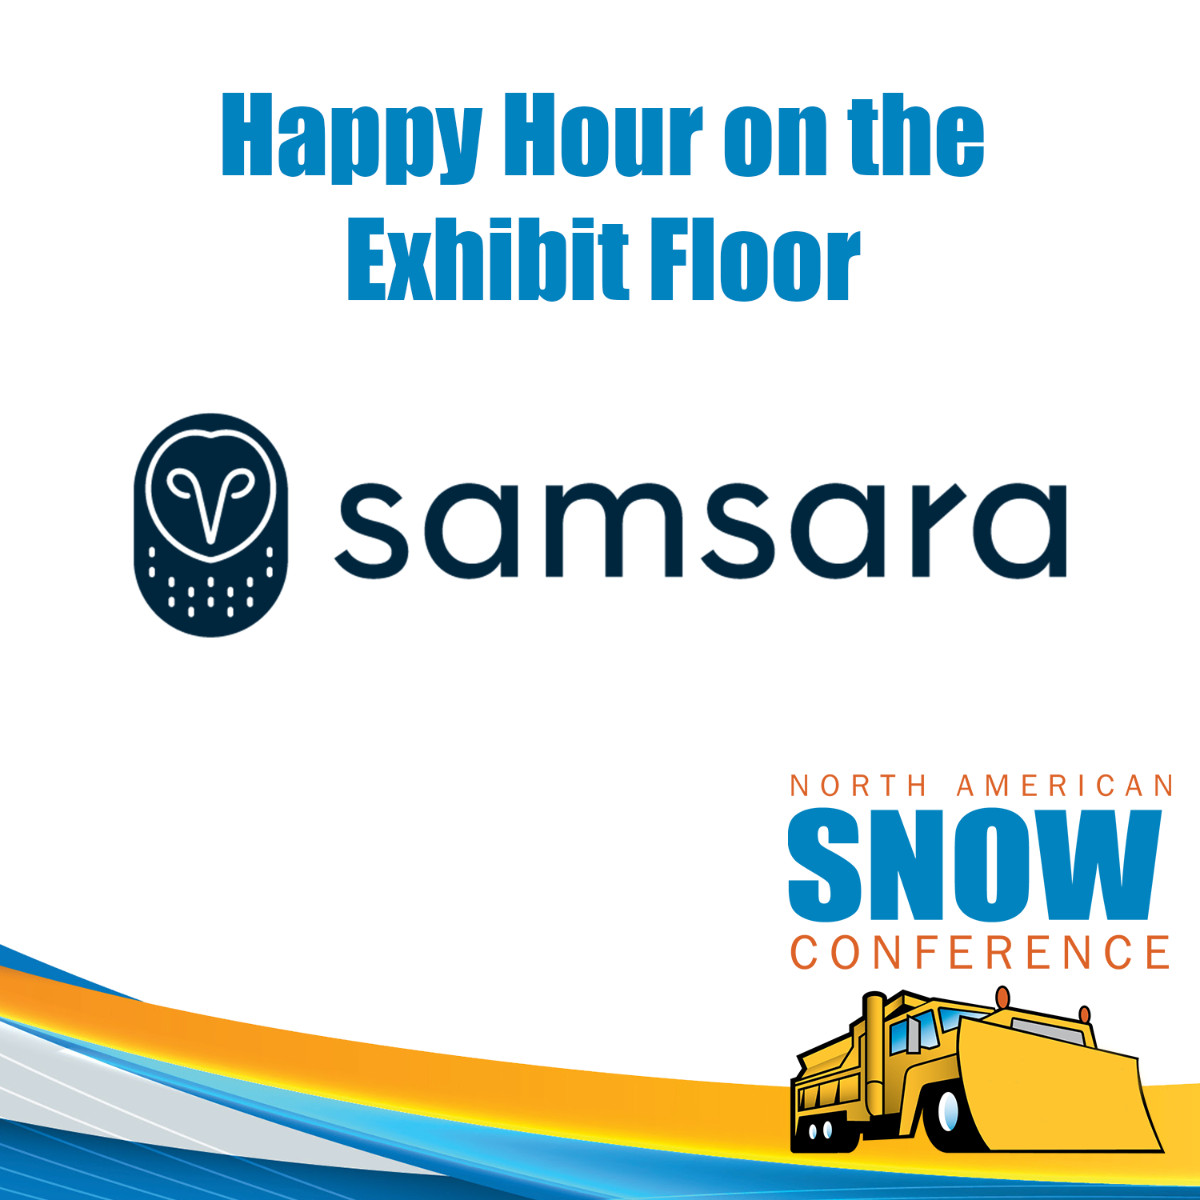 #sponsored | mid-conference blues got you down? Our friends over at @samsara (booth #737) are sponsoring an on the floor happy hour from 11 to 1 to perk you back up!